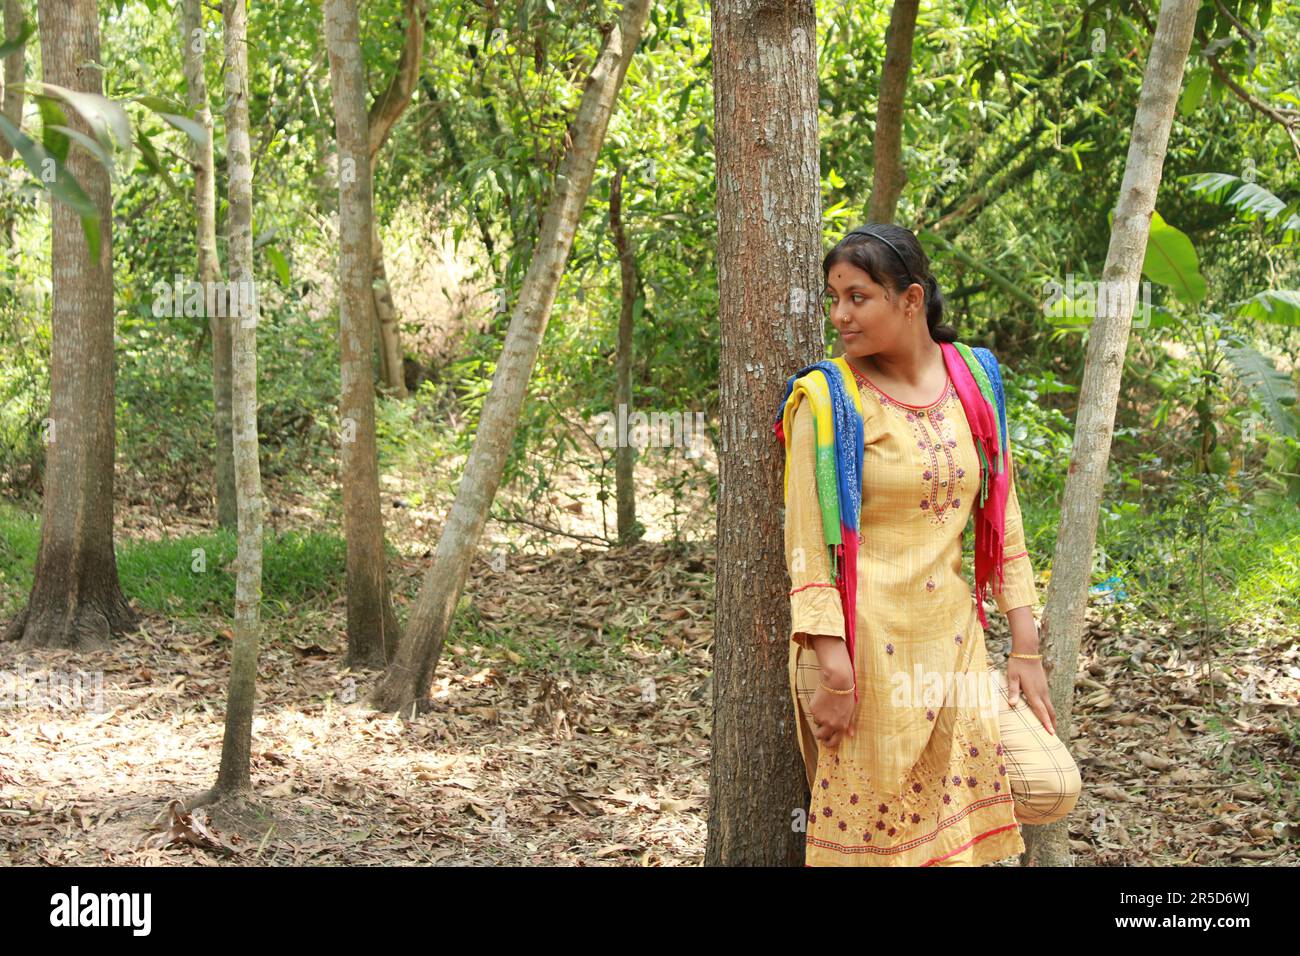 Charming Indian Girl In The Outdoors Stock Photo